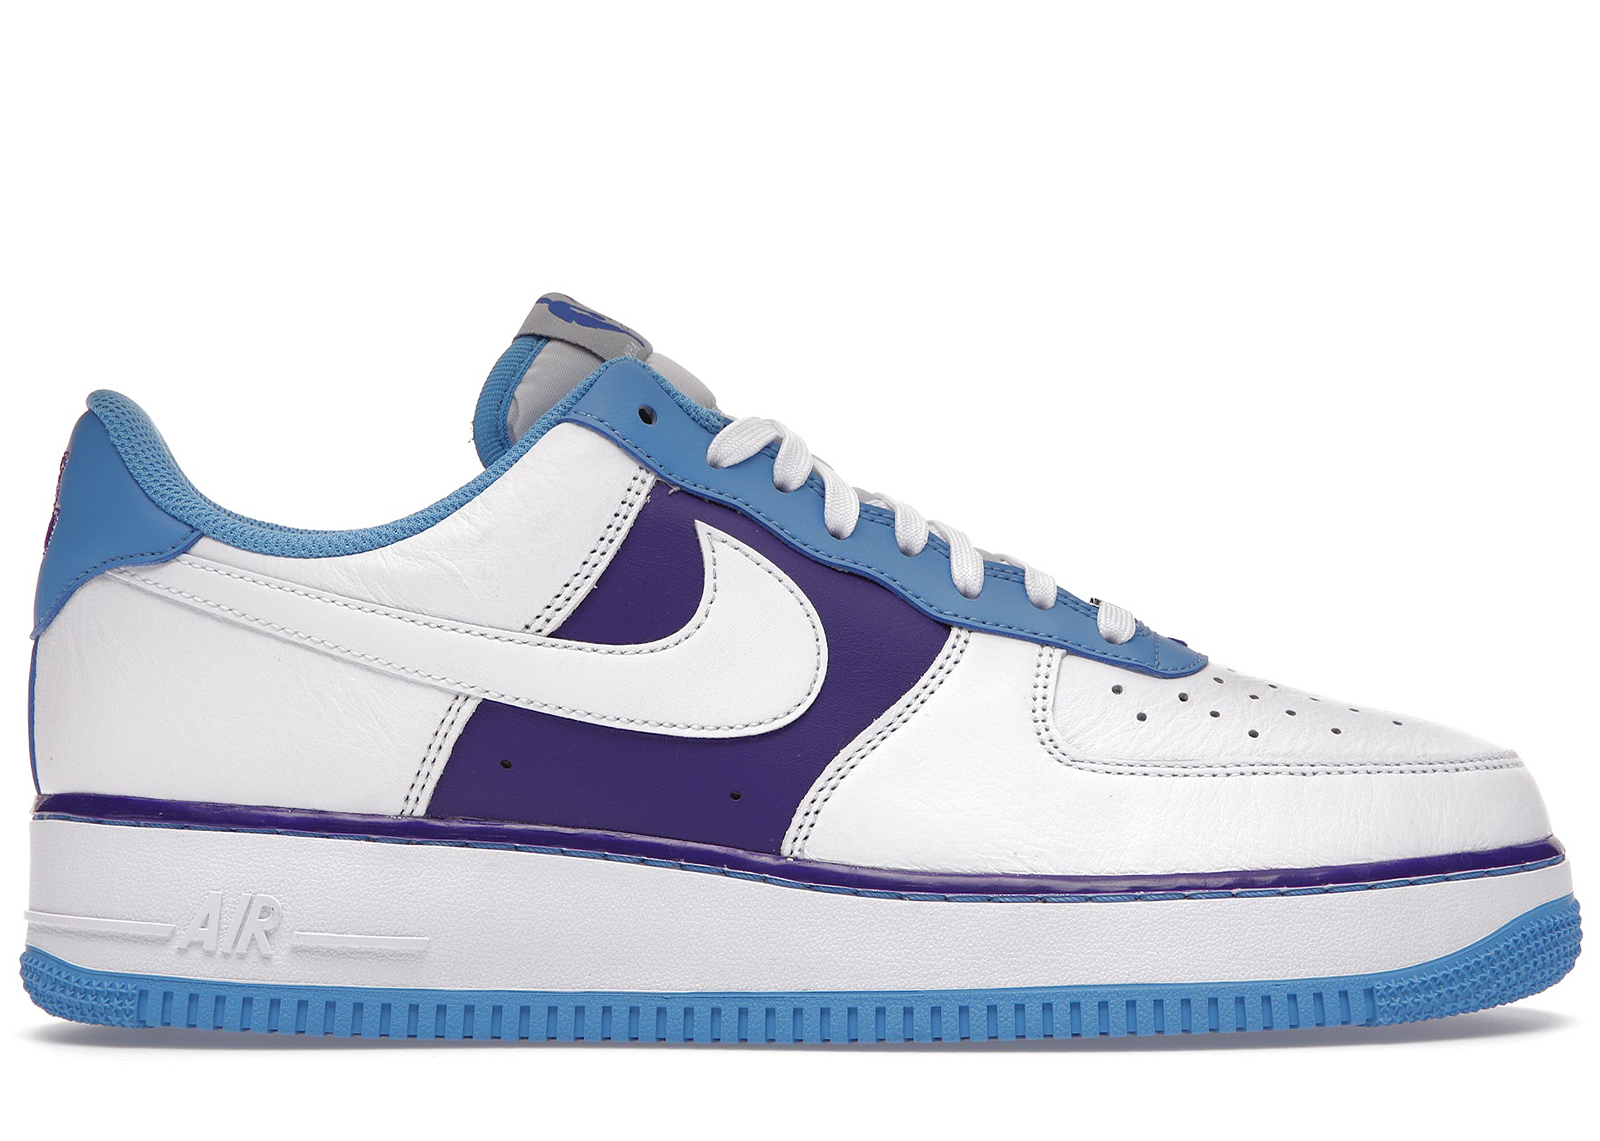 20aw NIKE AIR FORCE 1 '07 LV8 LOW レイカーズ